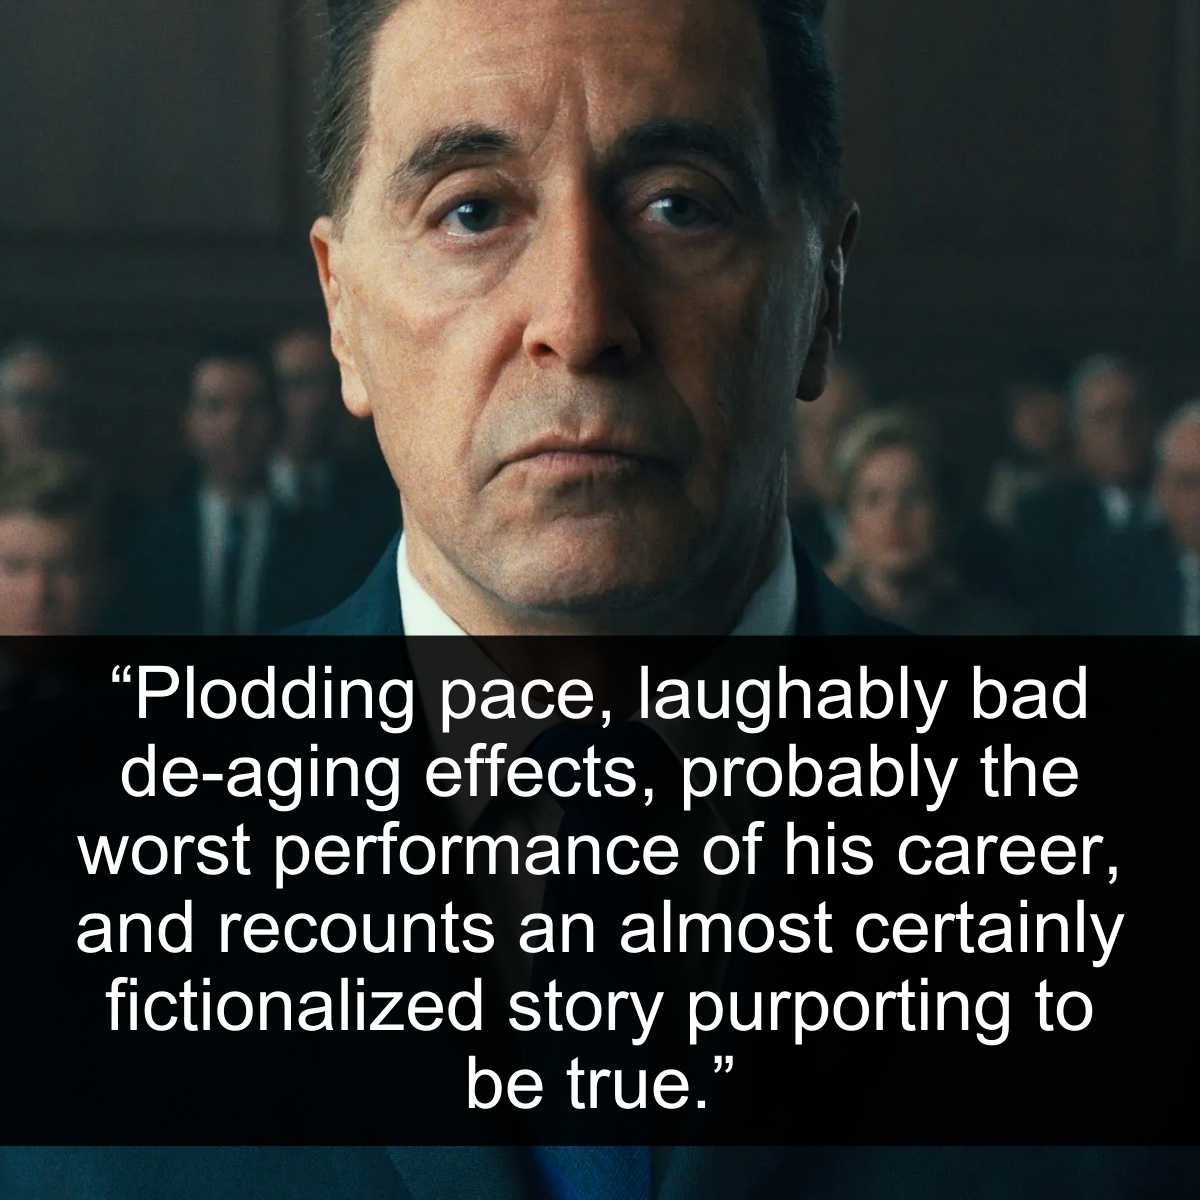 <p>When you reach a level of stardom like Al Pacino has, you can afford to take on some ridiculous roles just for the sake of a paycheck. You may even be celebrated for doing a lousy job. If you want an example, just look at the movie The Irishman. Whether the violence and facts of the story are actual or not doesn't matter.</p> <p>What matters is that, somehow, this overly testosterone-filled film hypnotizes audiences and critics. Only a few people made it out of the theater to see that it was really confusing and full of almost hurtful stereotypes. The visual effects used in the film are also pretty lackluster.</p>